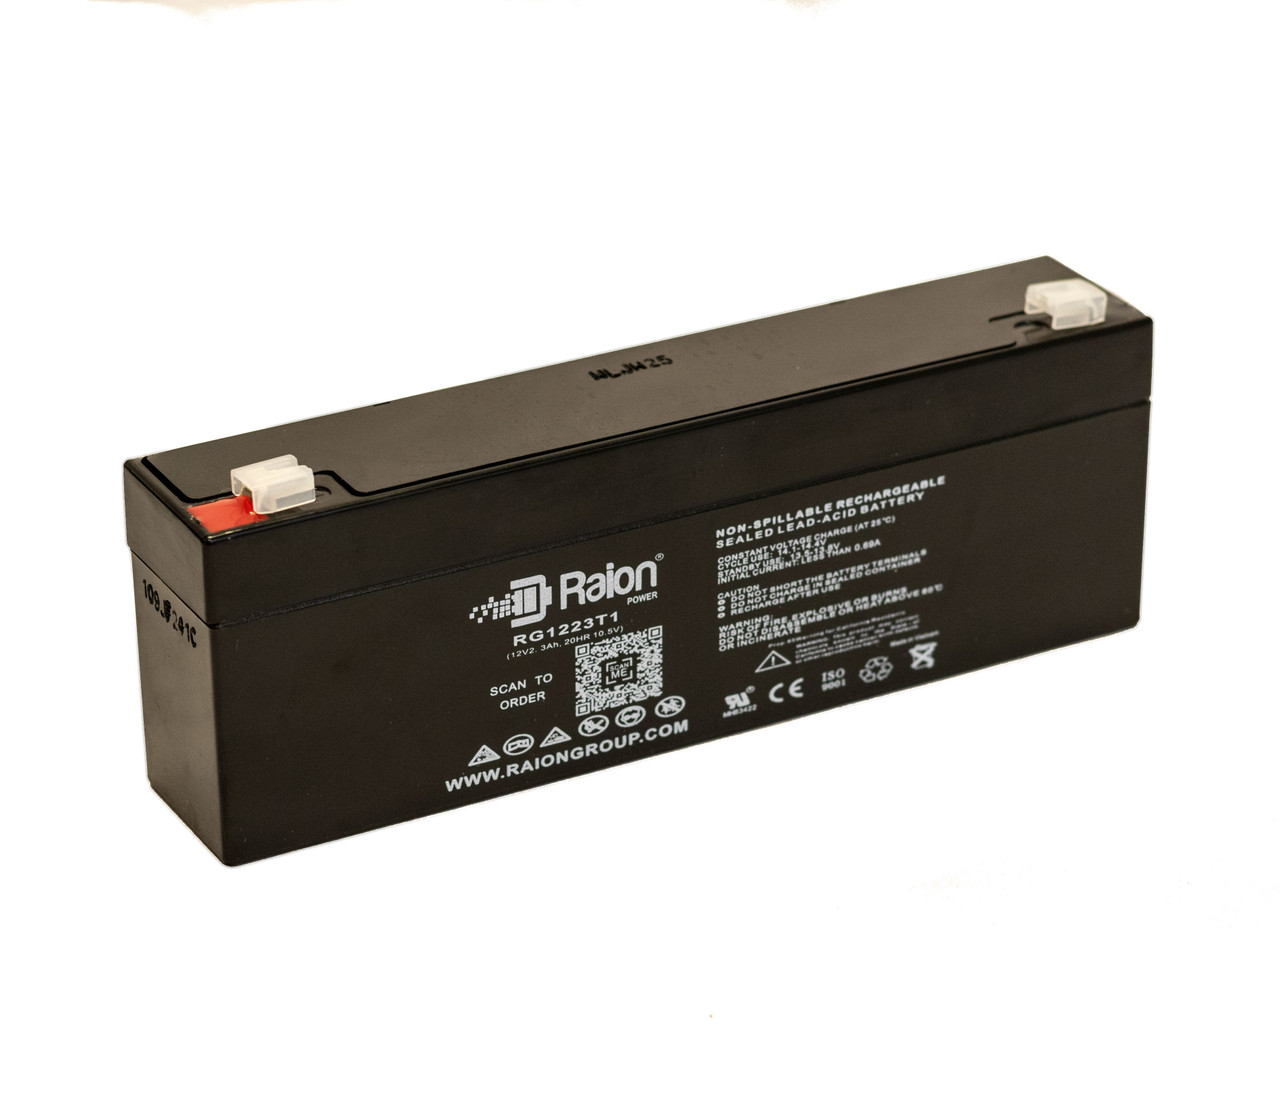 Raion Power RG1223T1 Replacement Battery for Biotek Instruments Index 2F2